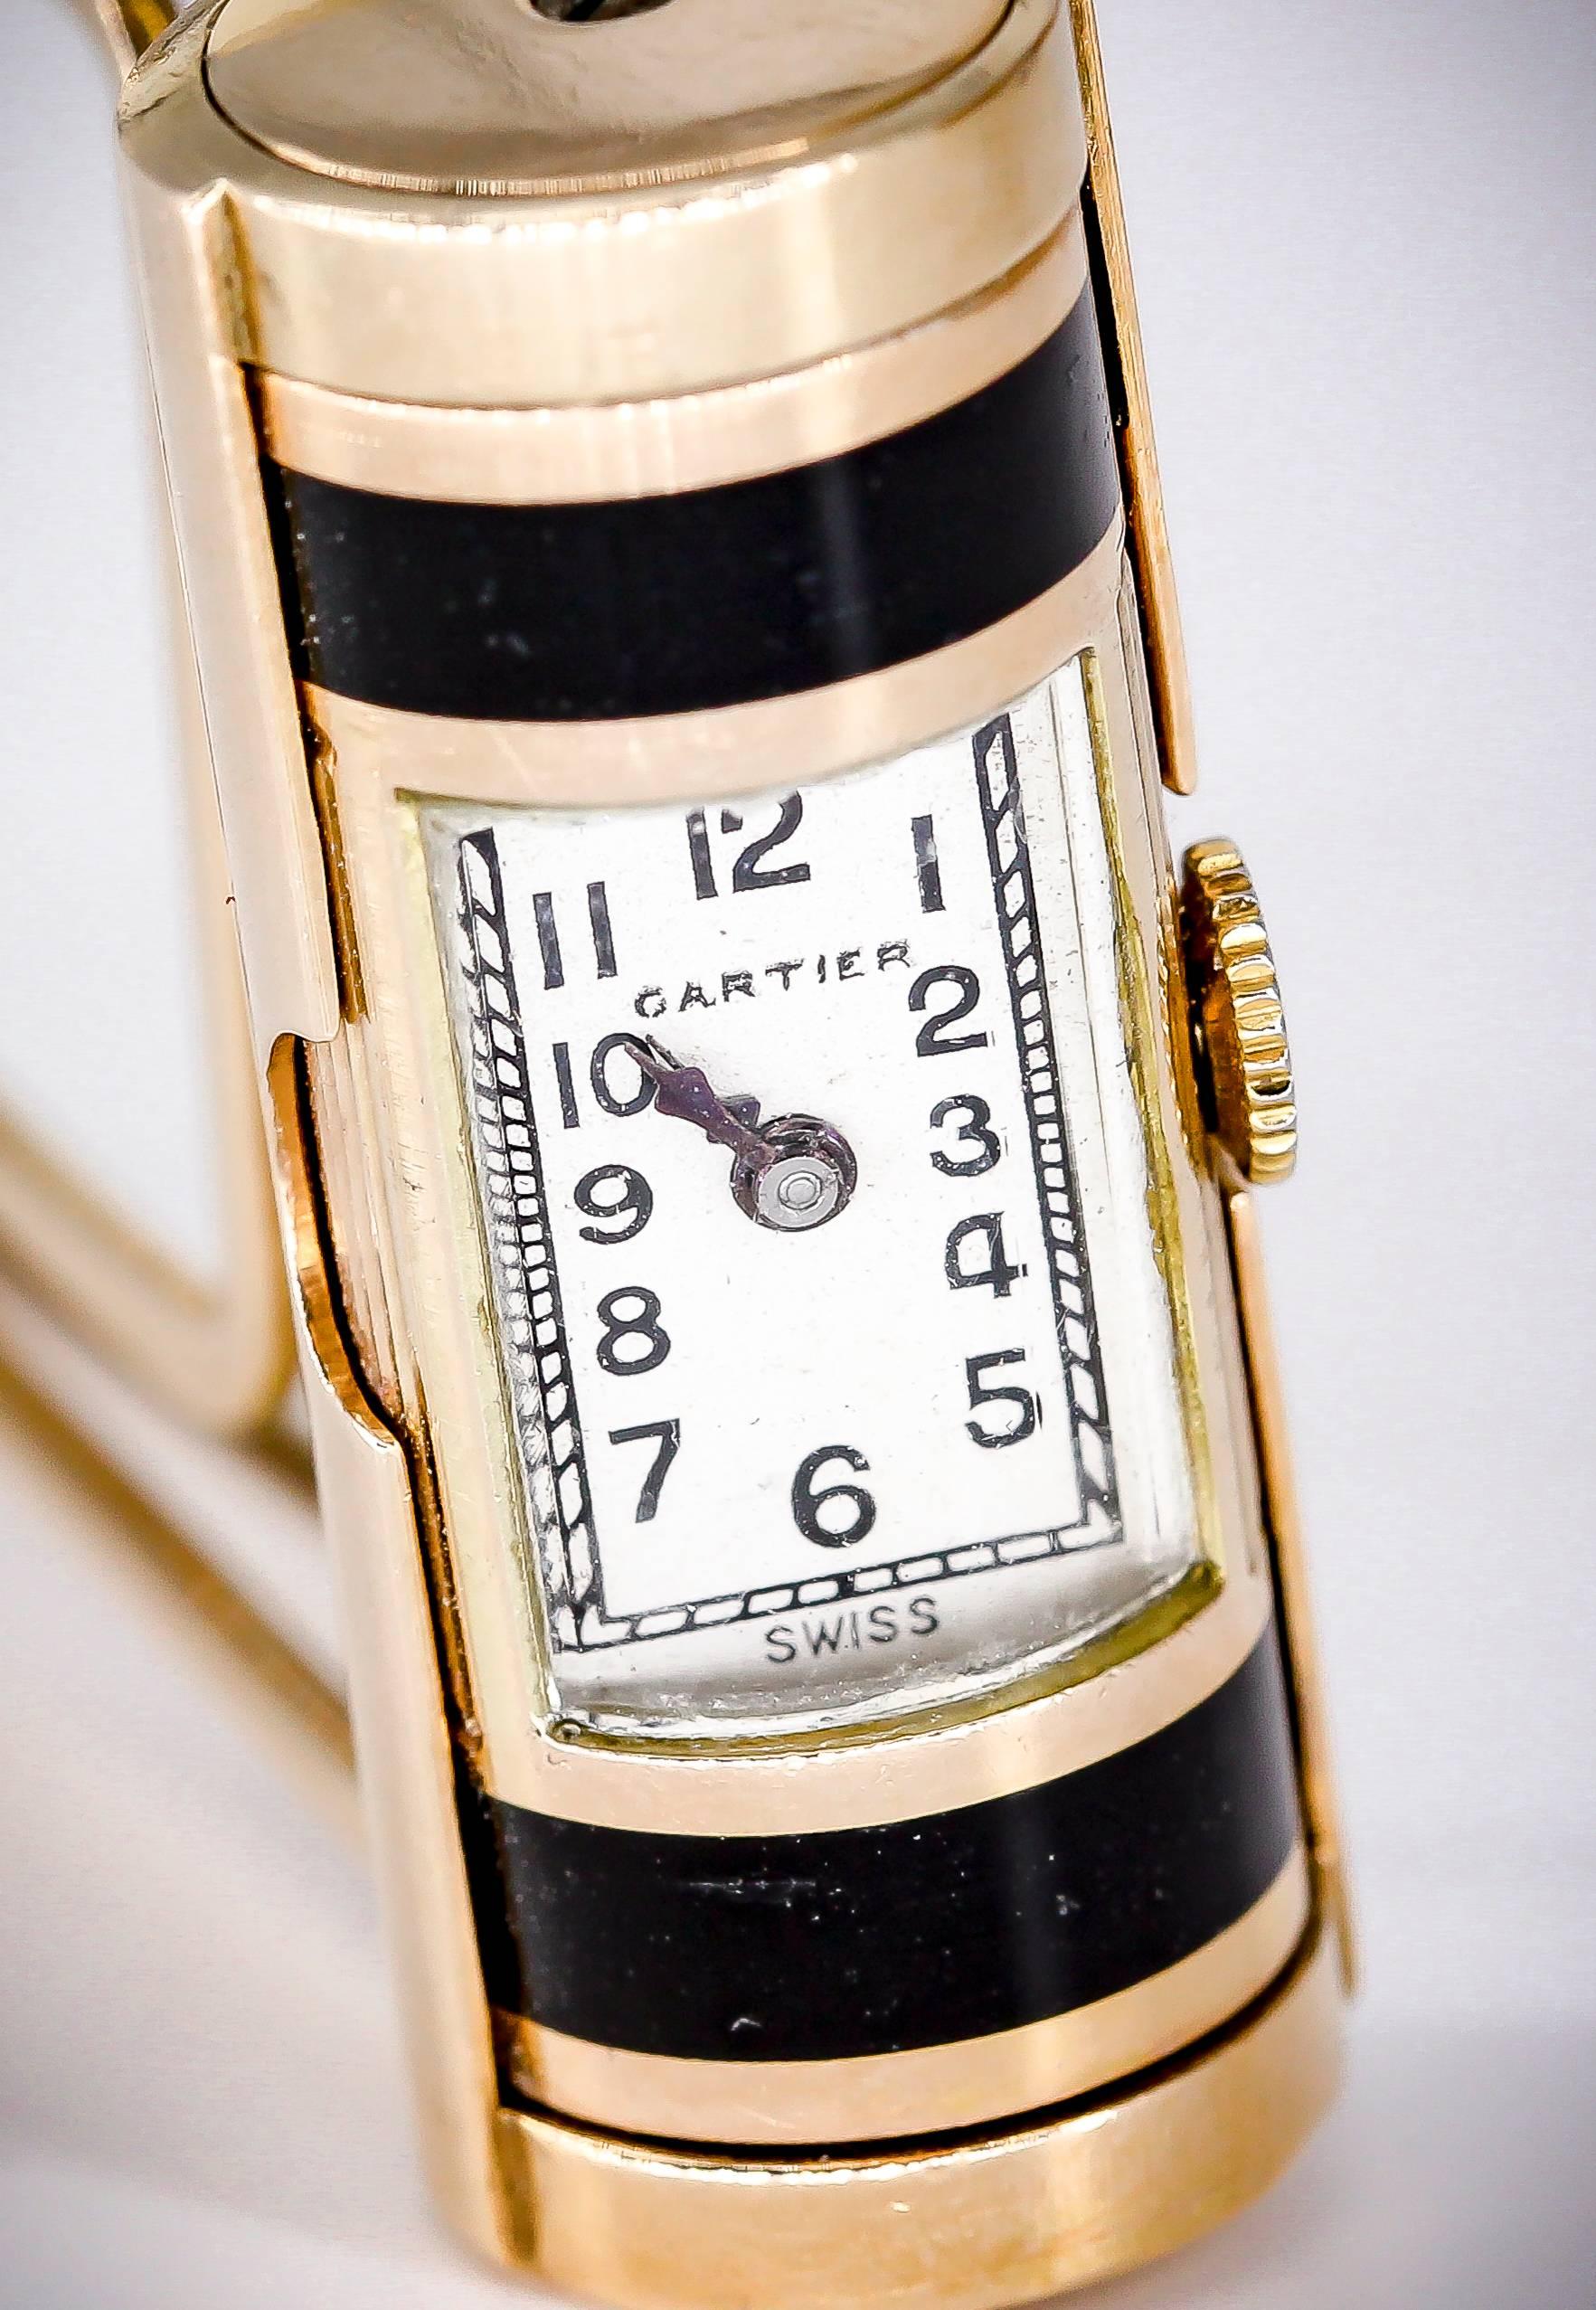 Handsome 14k yellow gold and black enamel money clip with watch built-in by Cartier. Watch swivels on its axis and can be completely concealed. It features roman numerals and a mechanical movement. Money Clip has a very nice yet simple design that